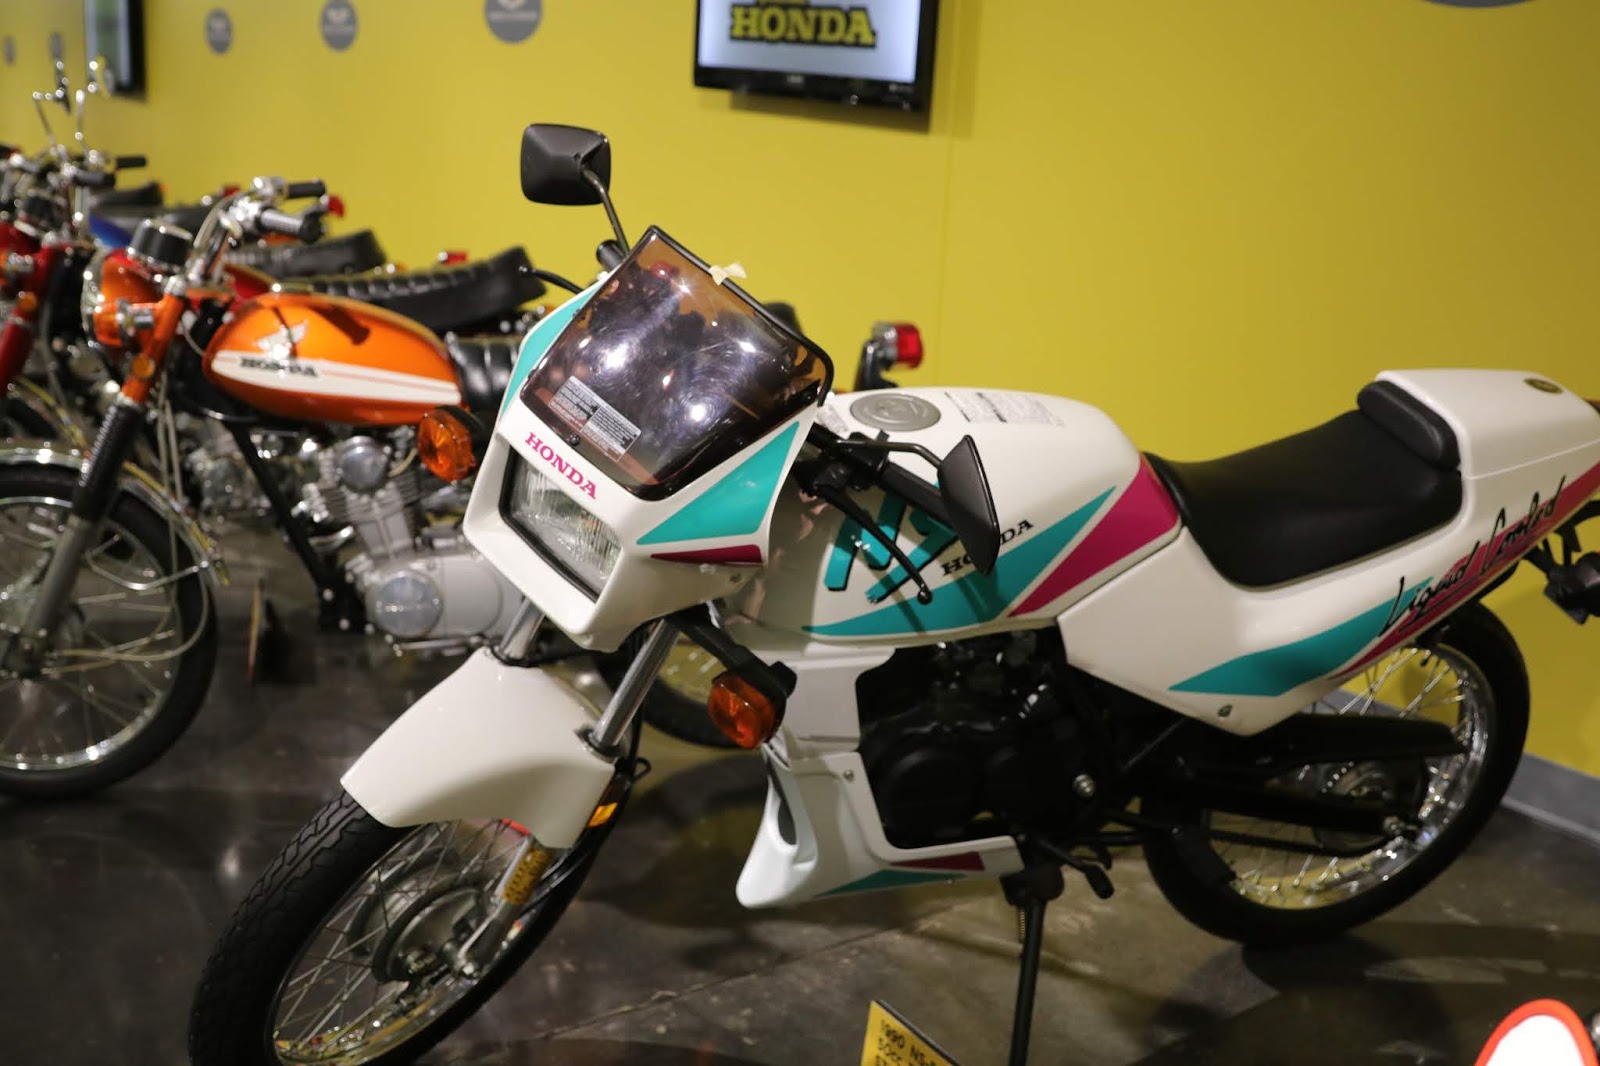 Oldmotodude 1990 Honda Water Cooled Two Stroke Ns 50 From The Maloney Honda Motorcycle Collection On Display At Lemay America S Car Museum Tacoma Wa